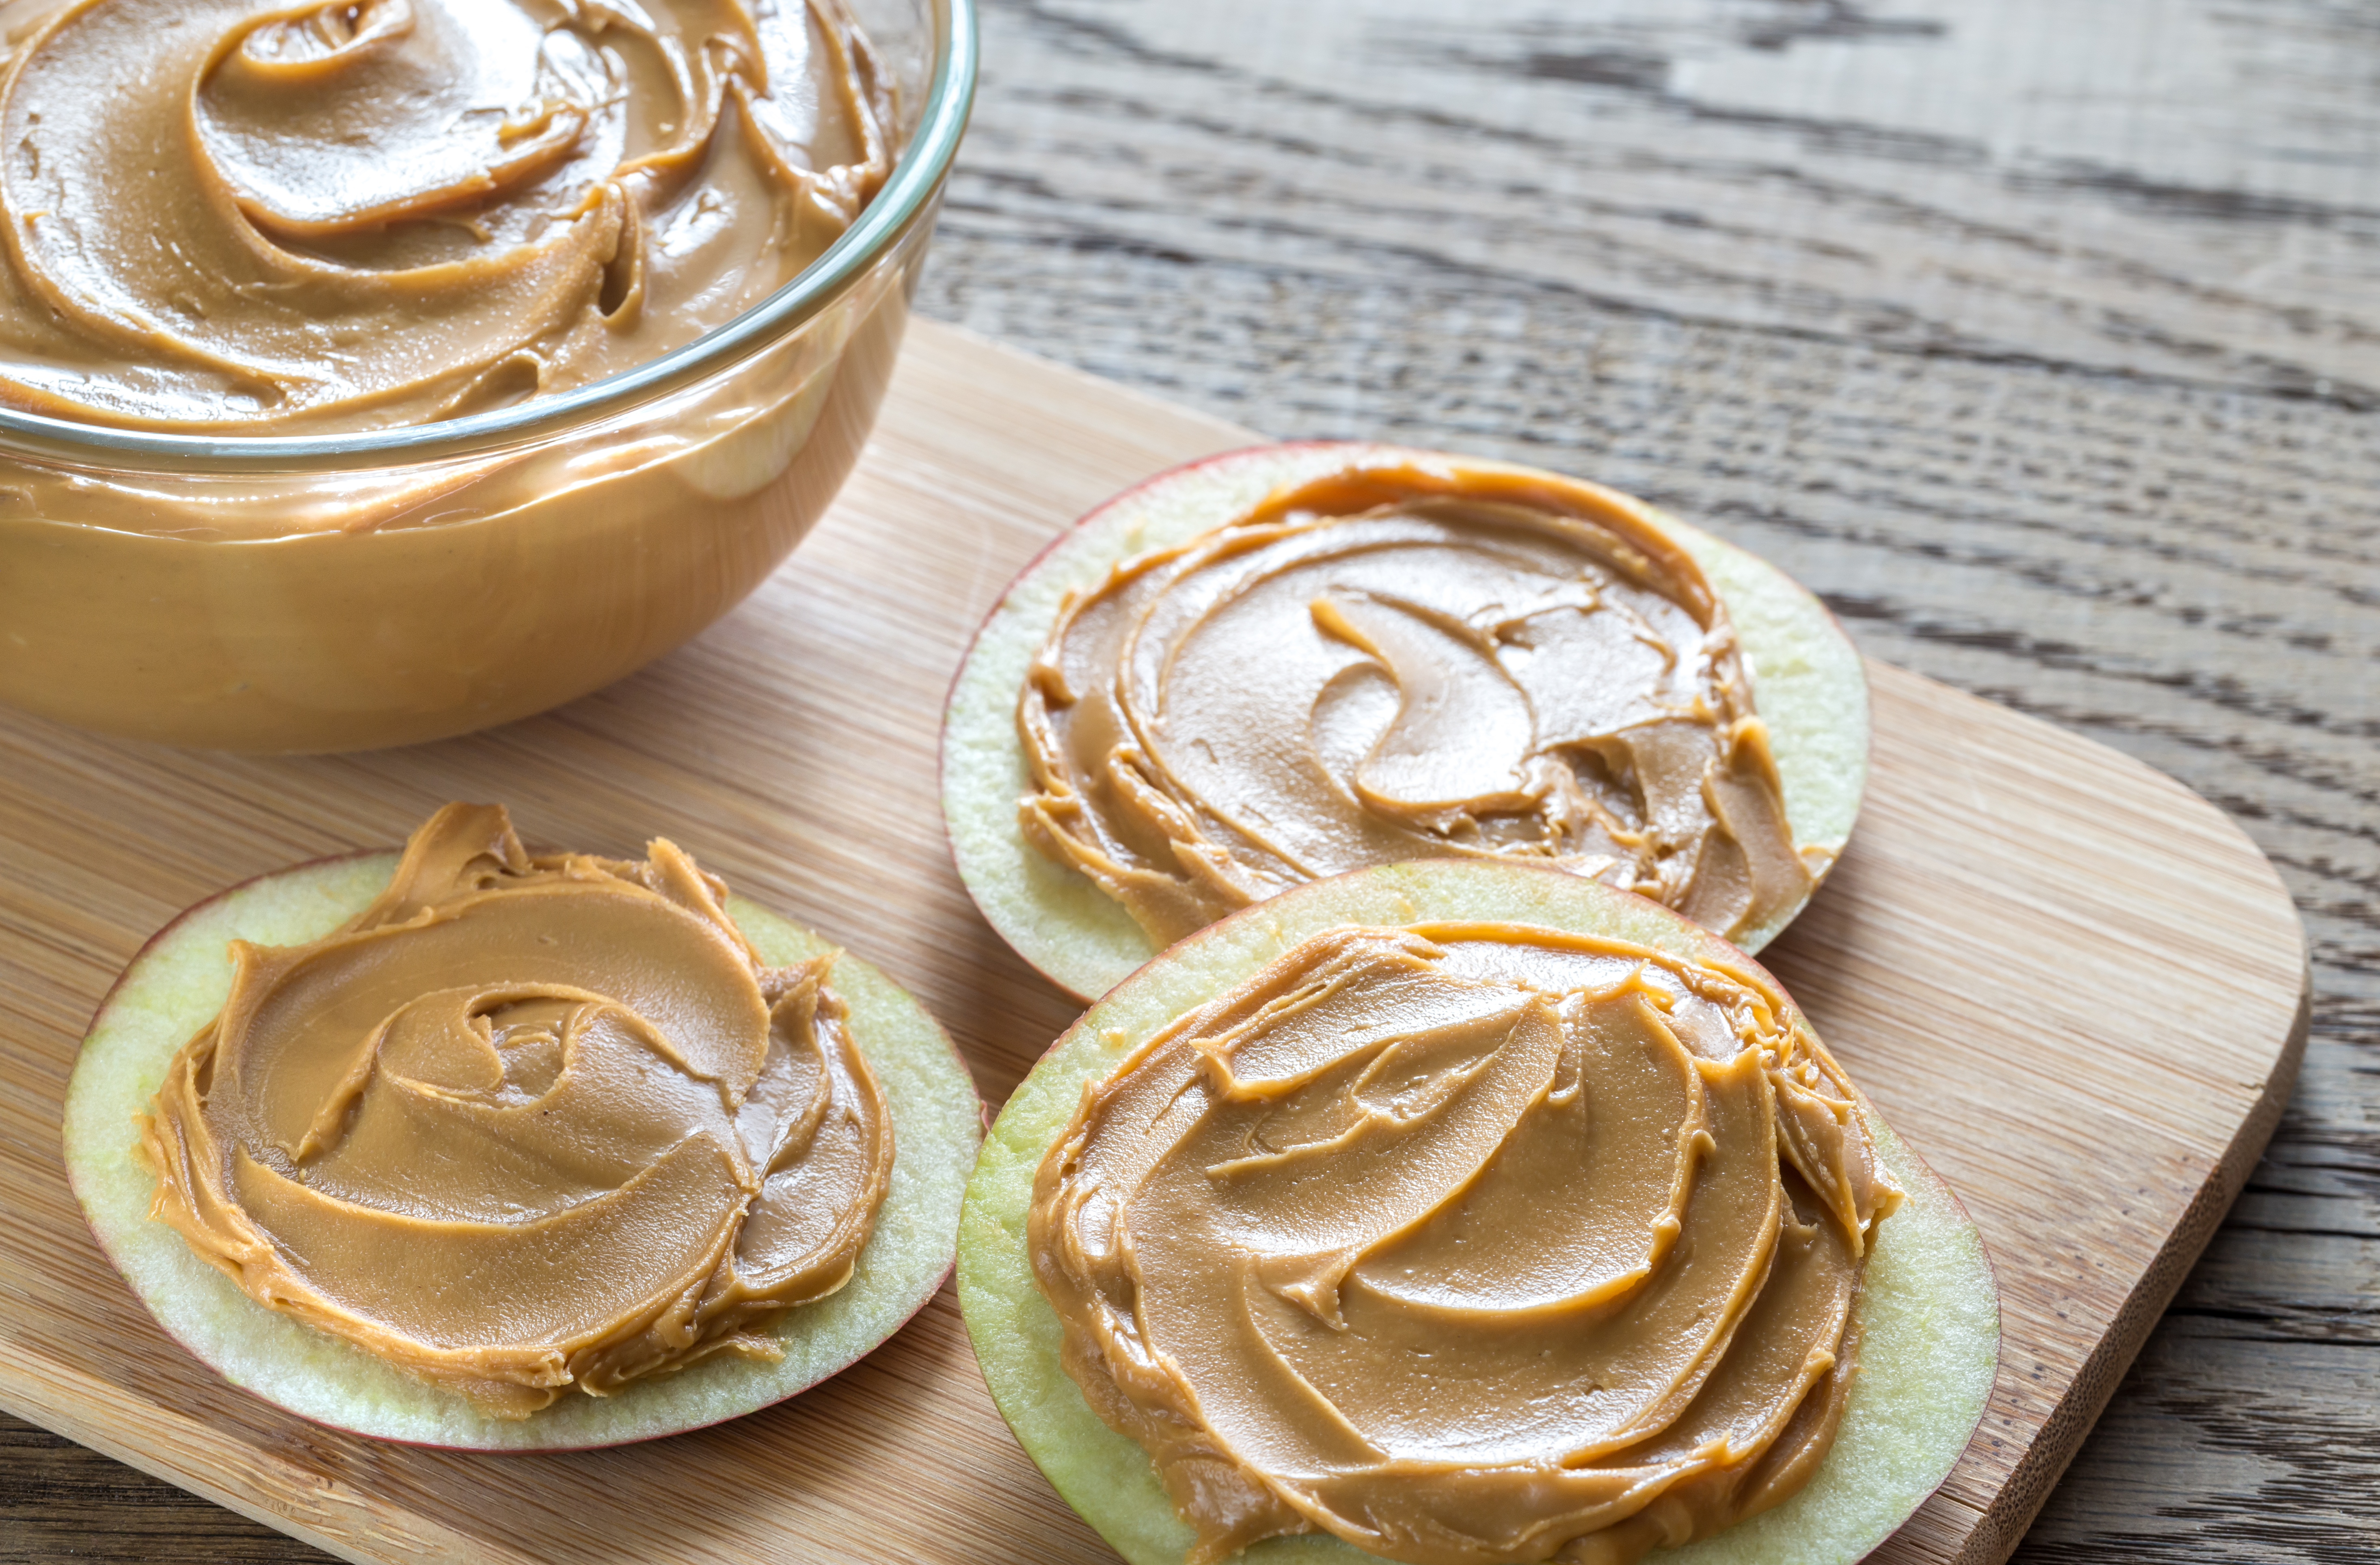 Is Peanut Butter Good for You? Nutrition and Health Benefits